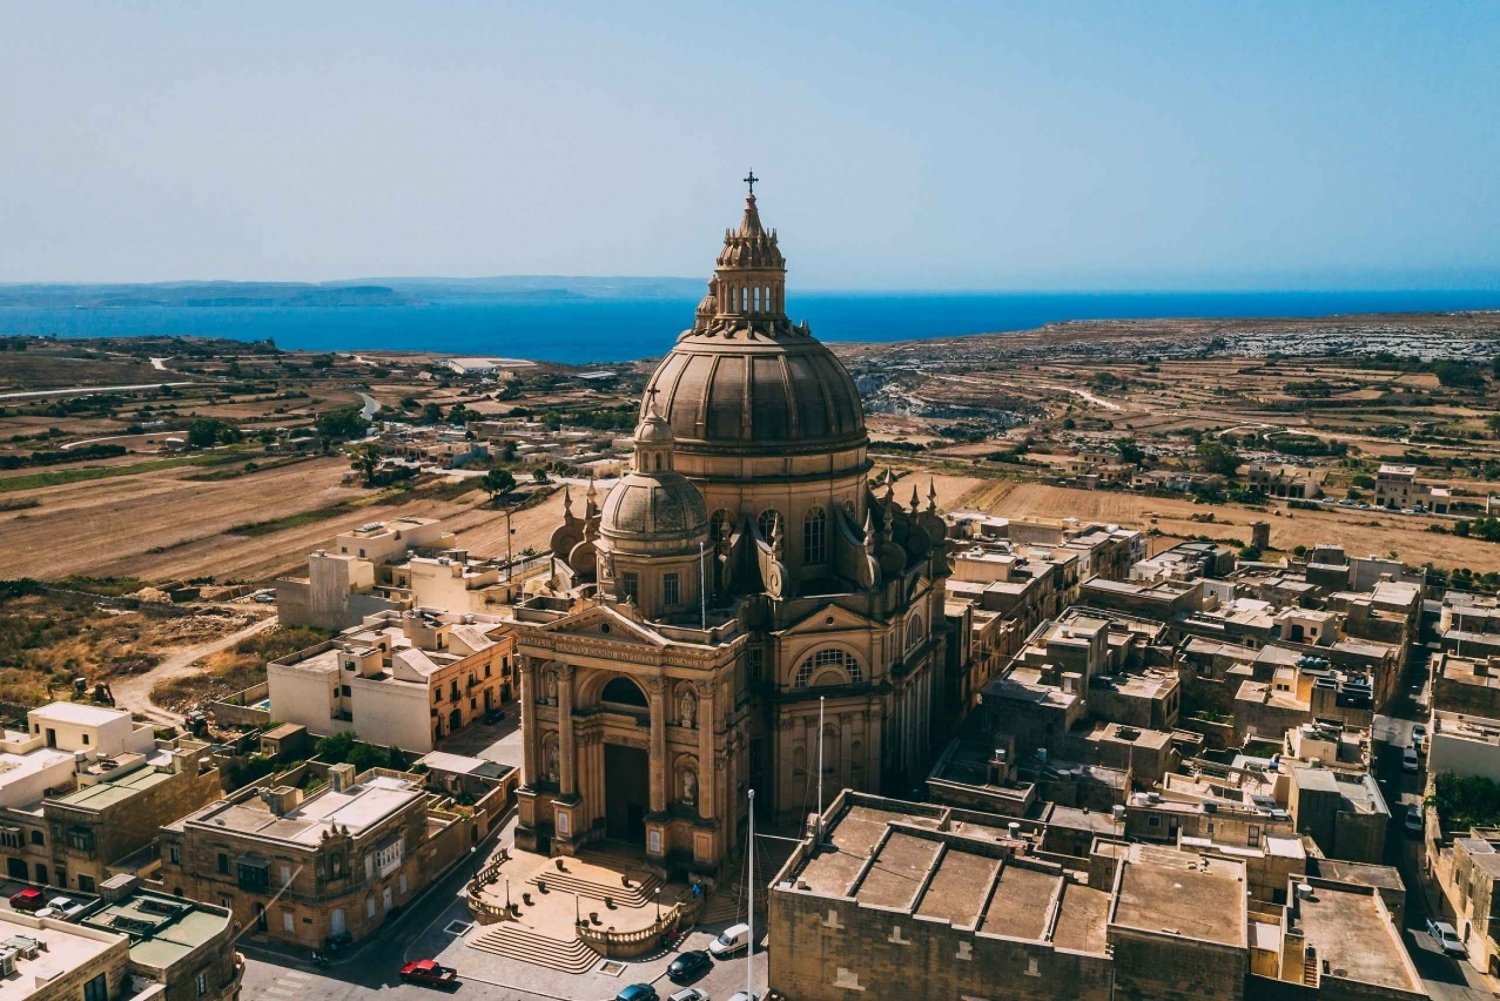 Malta: Full-Day Gozo and Blue Lagoon Cruise with Drinks